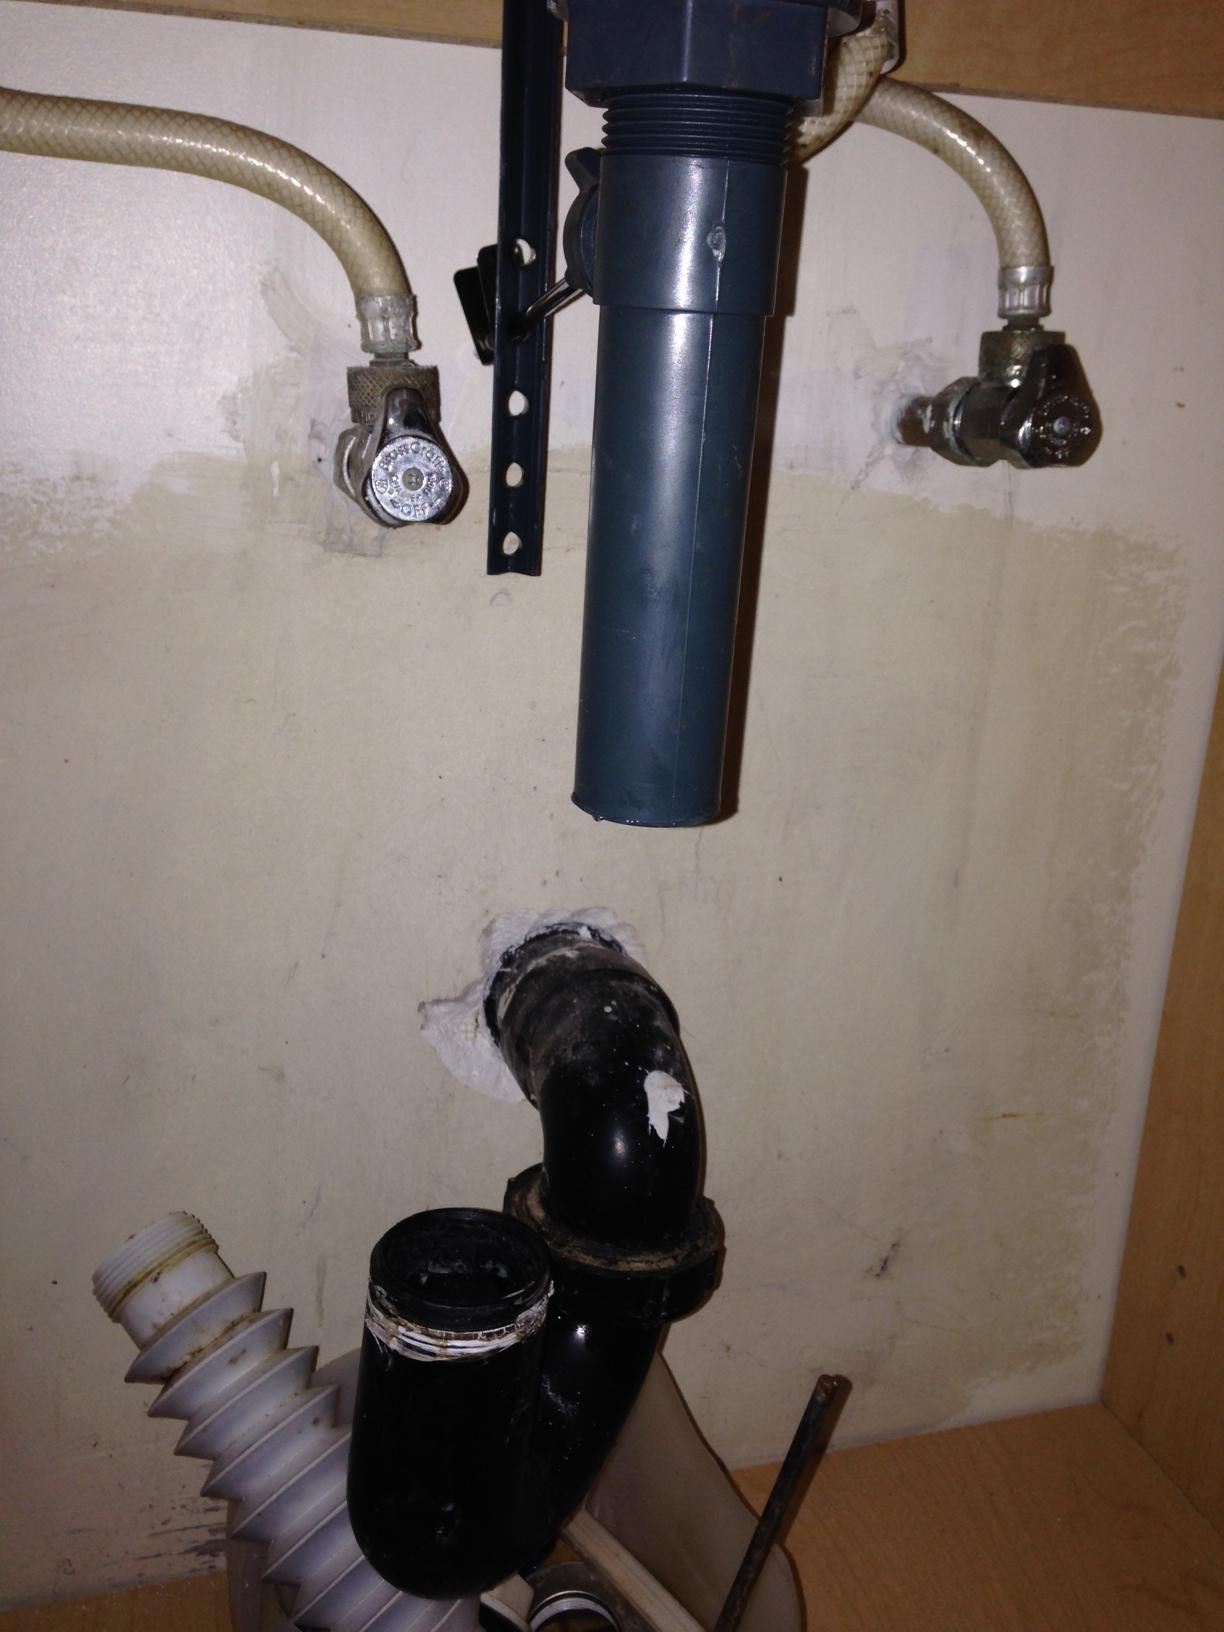 Bathroom Sink Pipes
 plumbing Sink tailpiece doesn t line up with trap Home